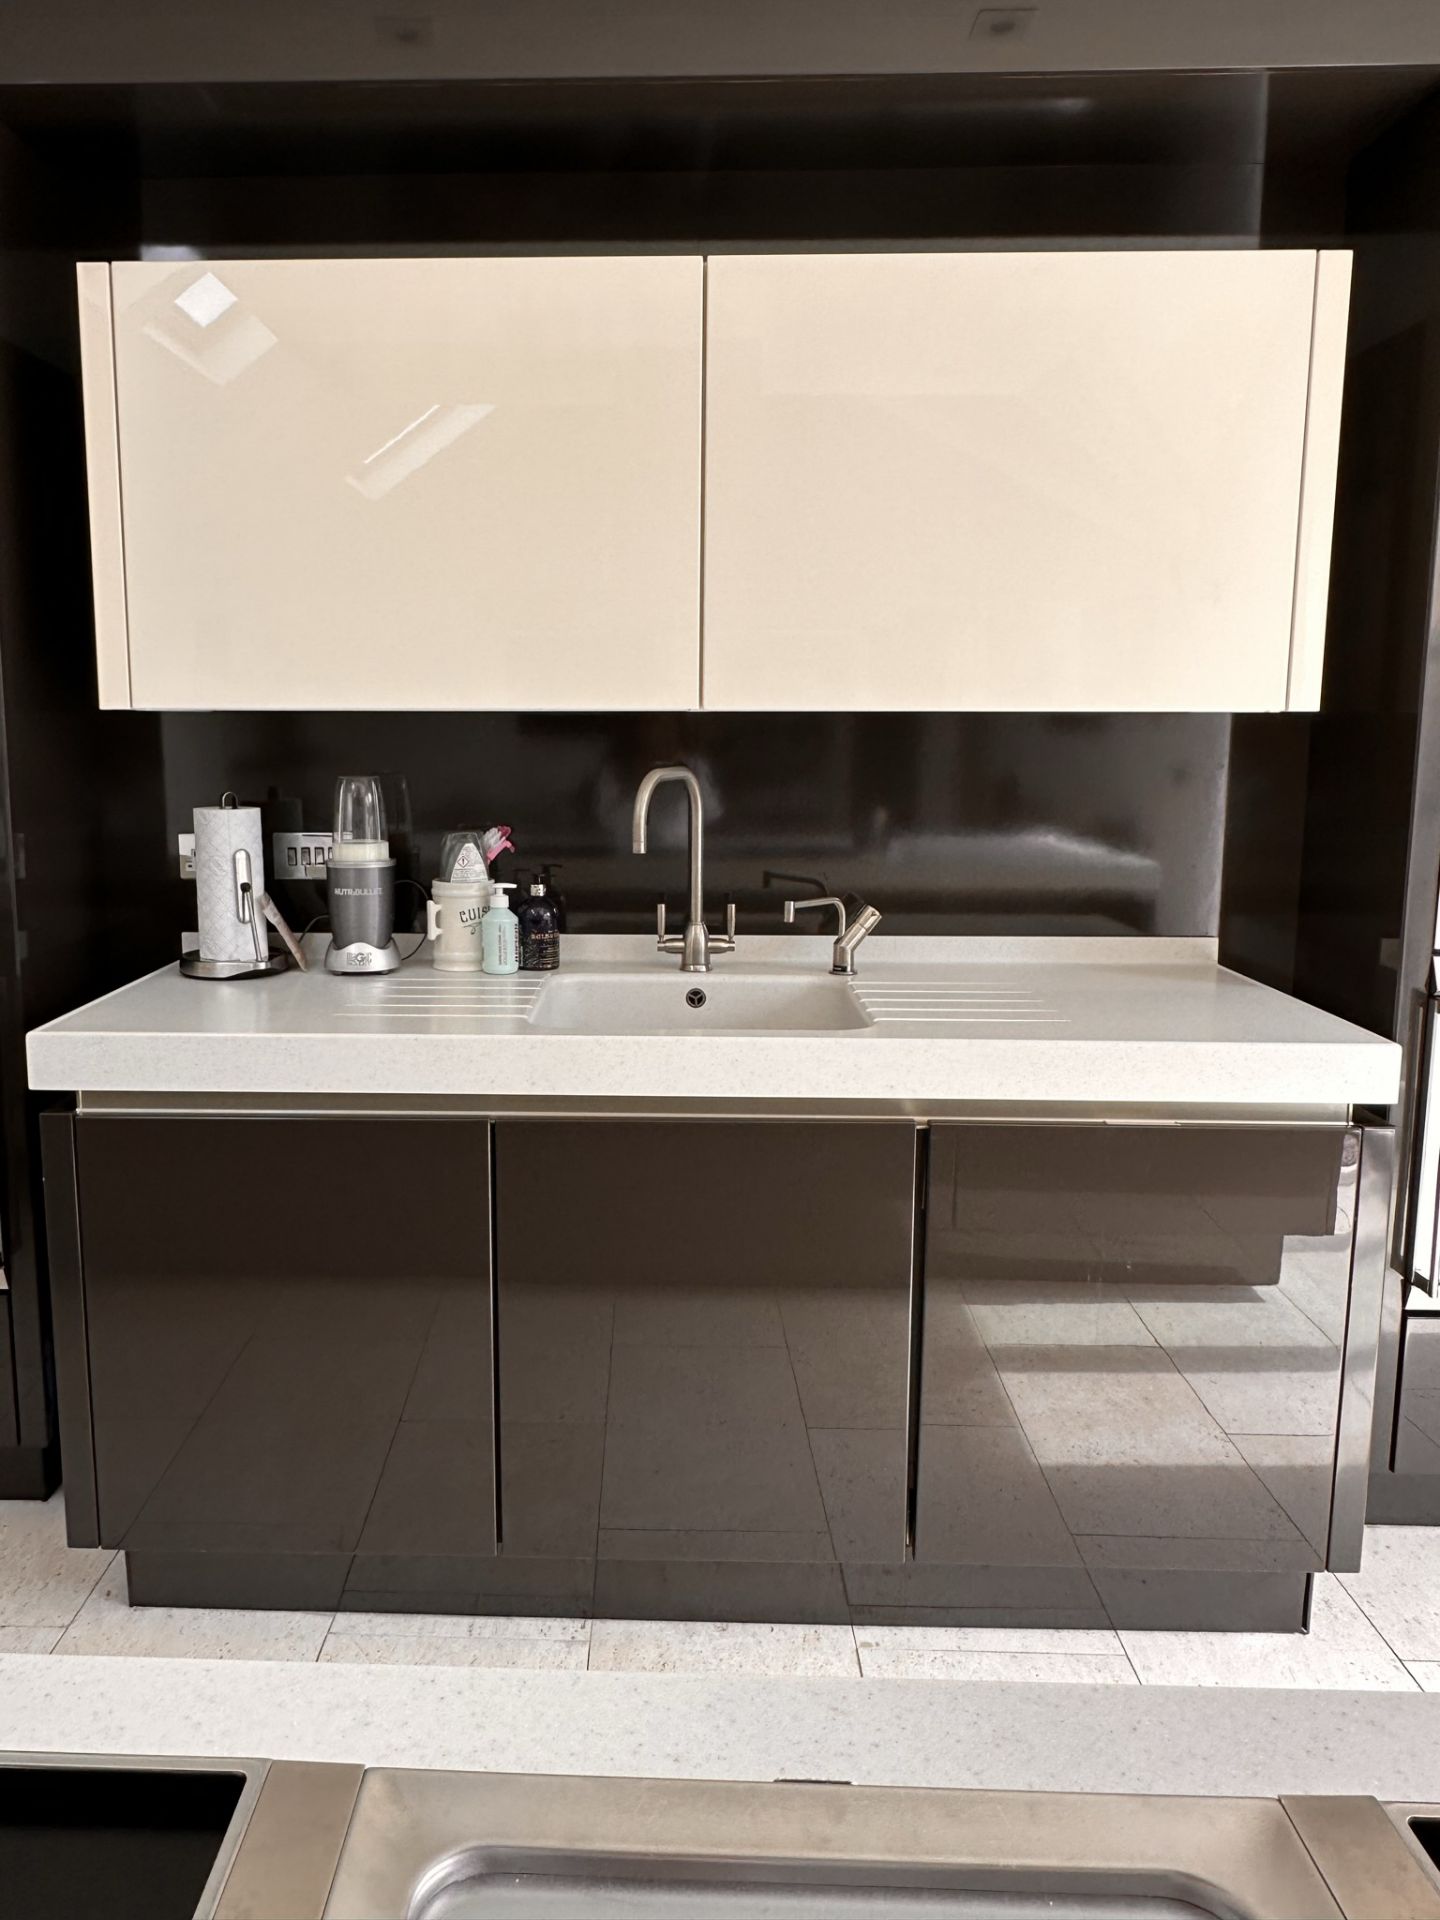 1 x Stunning Bespoke Siematic Gloss Fitted Kitchen With Corian Worktops - In Excellent Condition - - Image 43 of 94